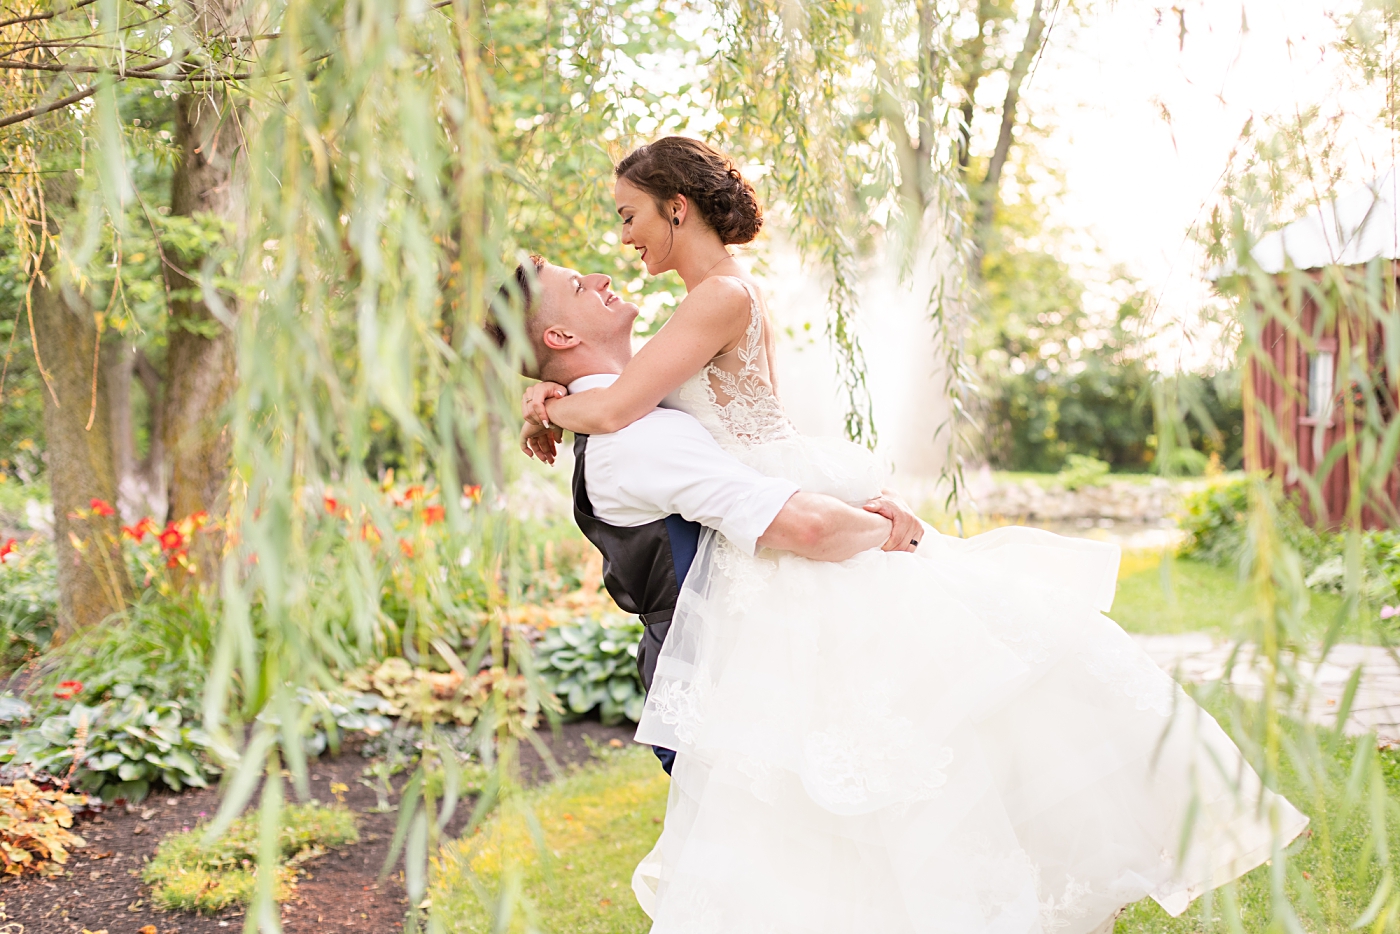 Groom lifting bride under a willow tree